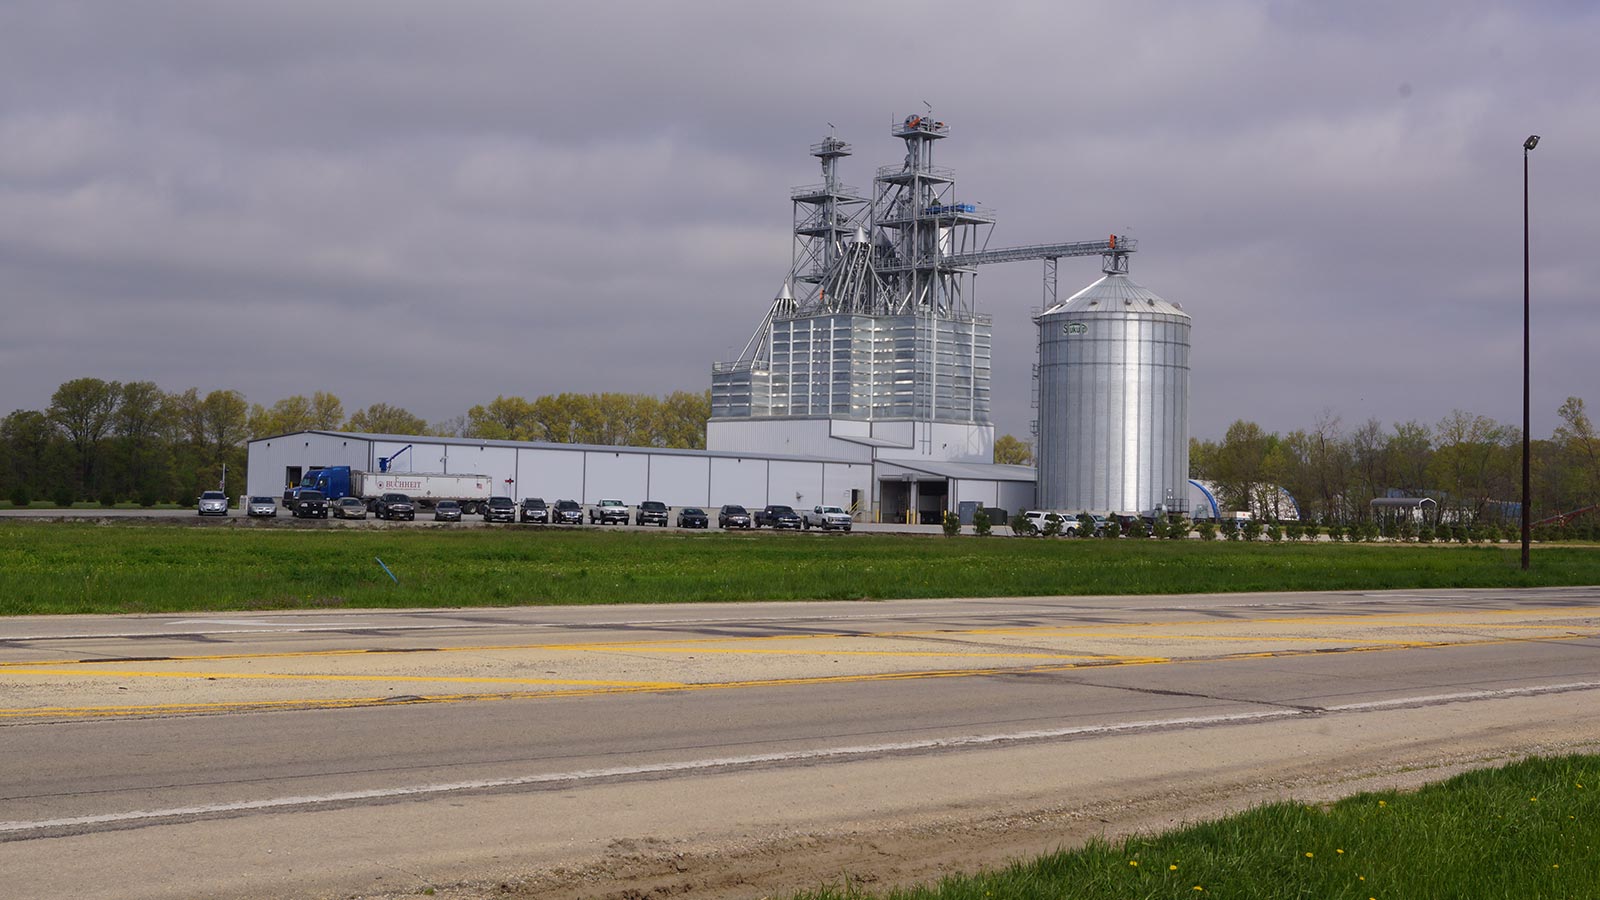 full view of the Effingham Illinois feed mill from the highway